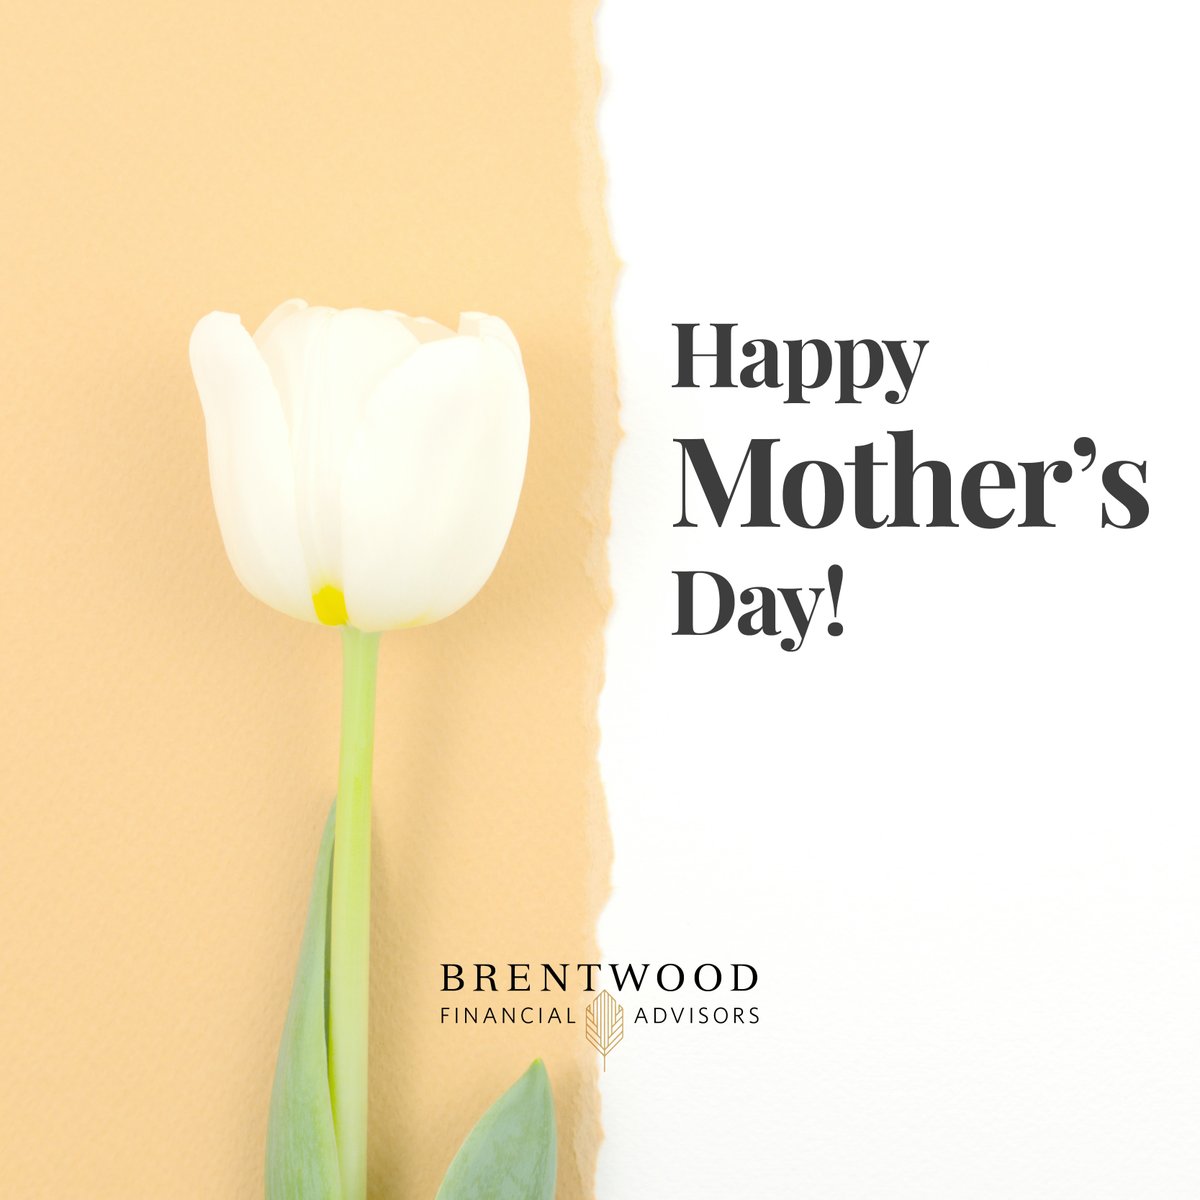 Mothers hold their children’s hands for a while but their hearts forever. Happy Mother’s Day! 

#BrentwoodFinancial #HappyMothersDay